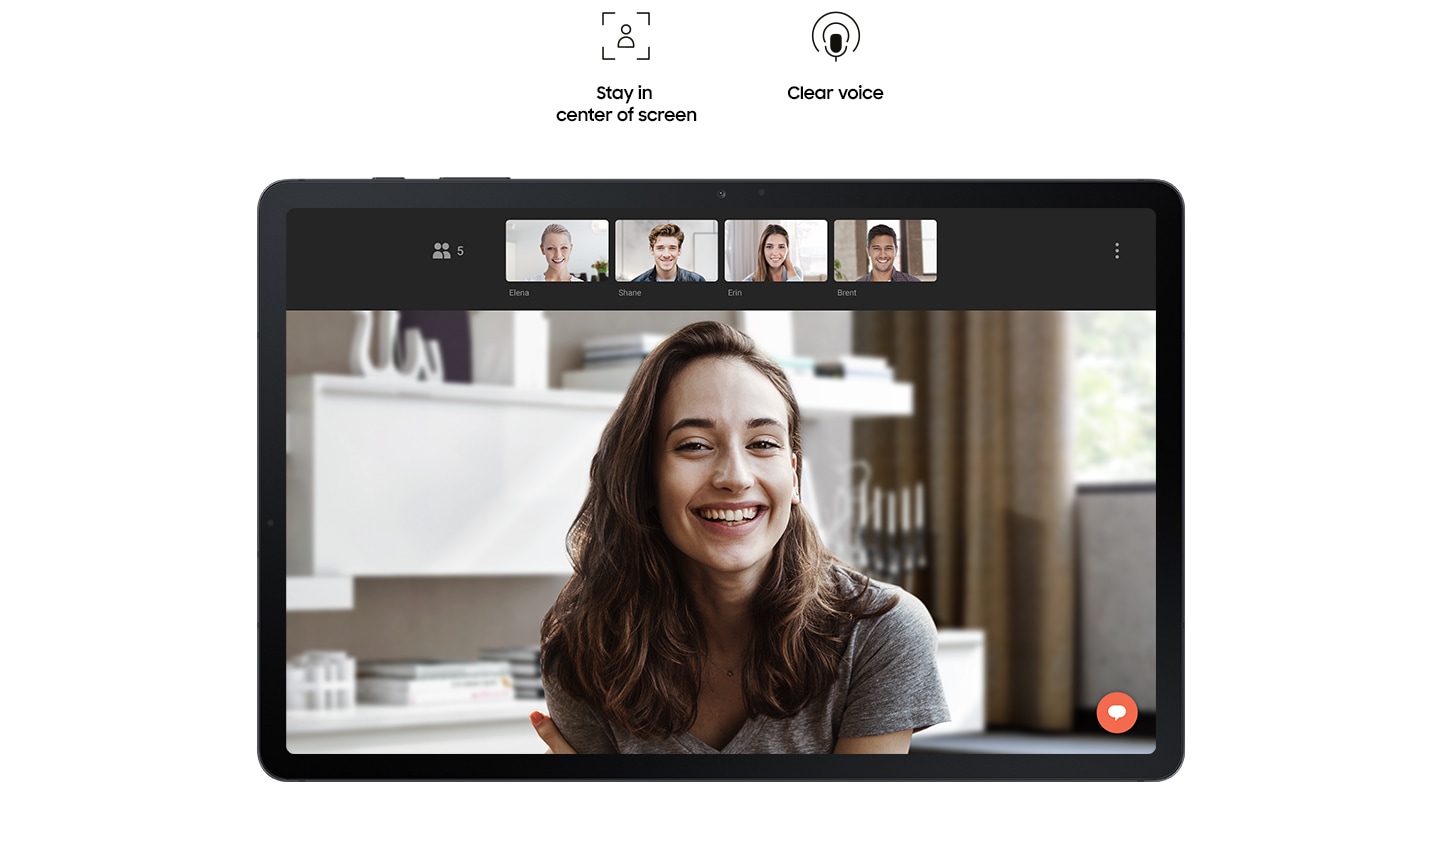 Galaxy Tab S7 FE 5G seen from the front with a video chat onscreen between a woman and four friends. Icons say Stay in centre of screen and clear voice.